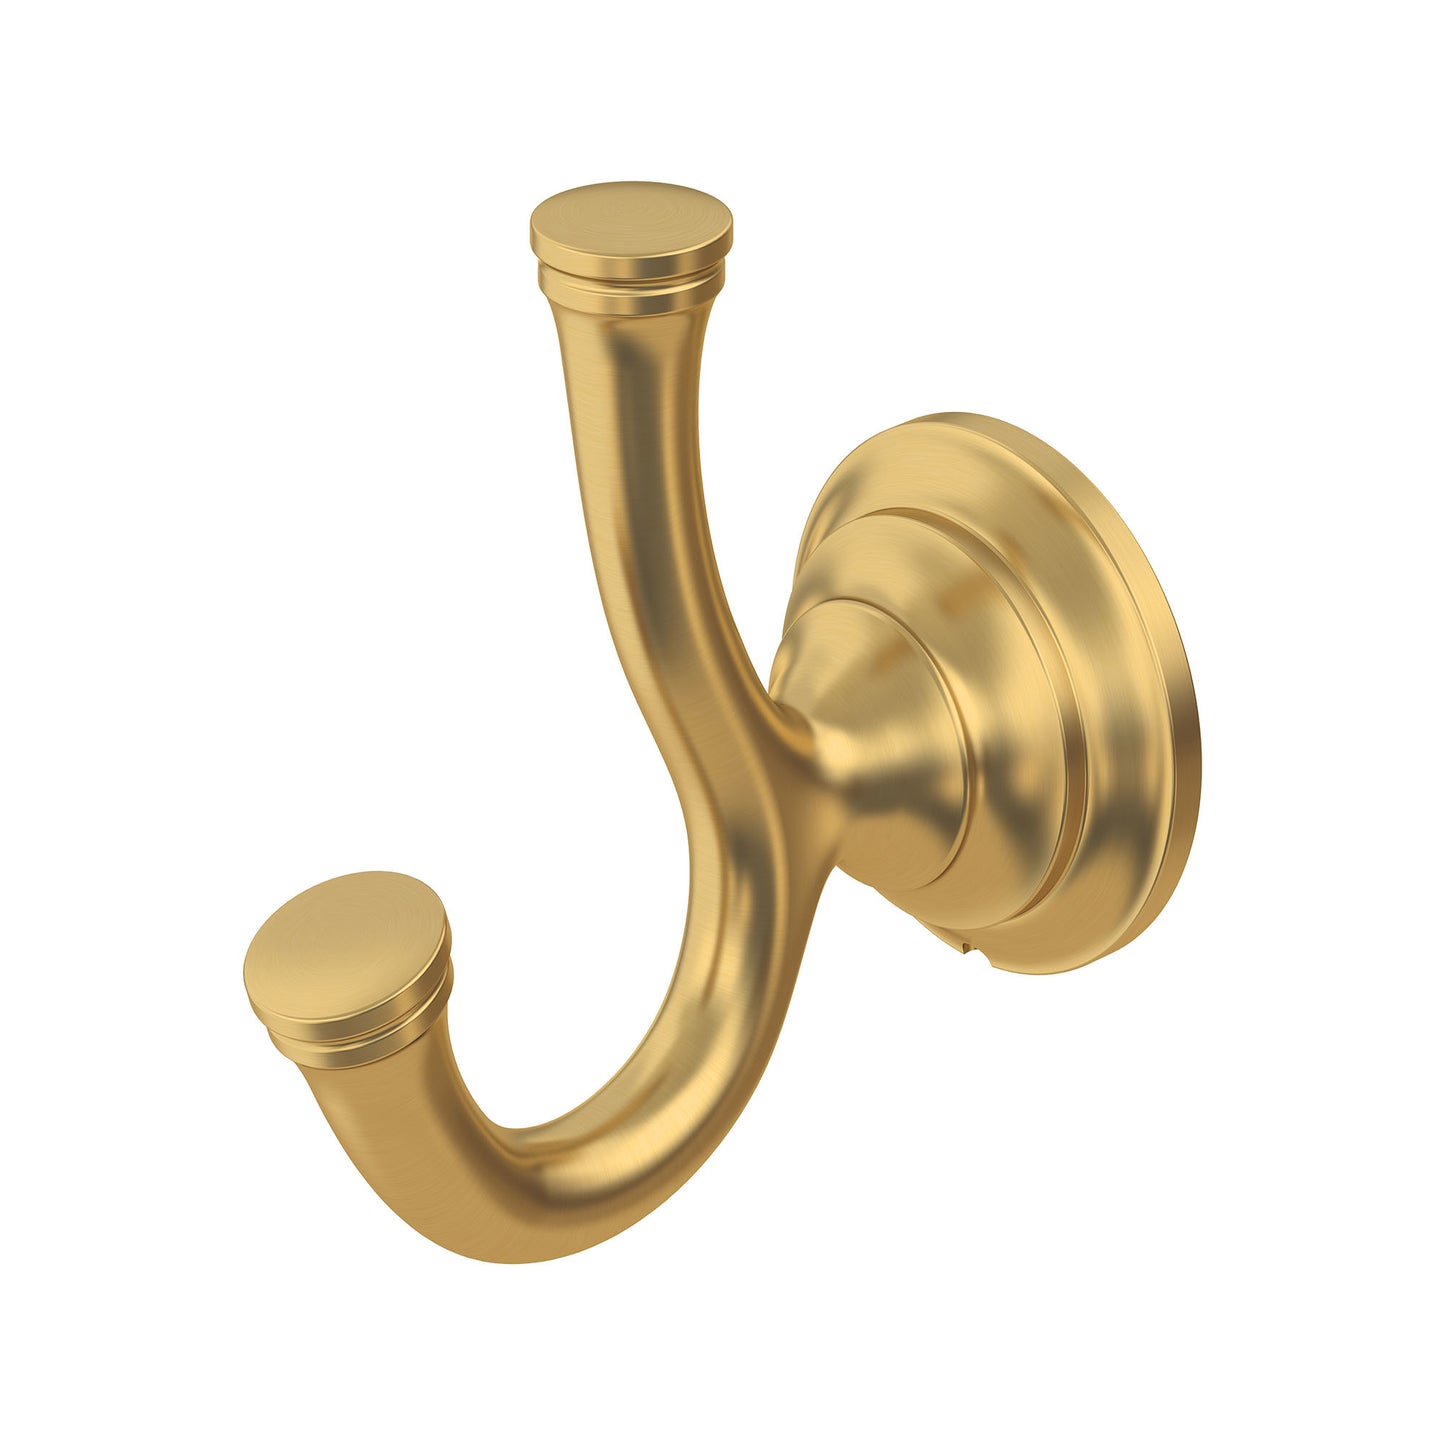 AMERICAN-STANDARD 7052210.GN0, Delancey Double Robe Hook in Grohe Brushed Cool Sunrise